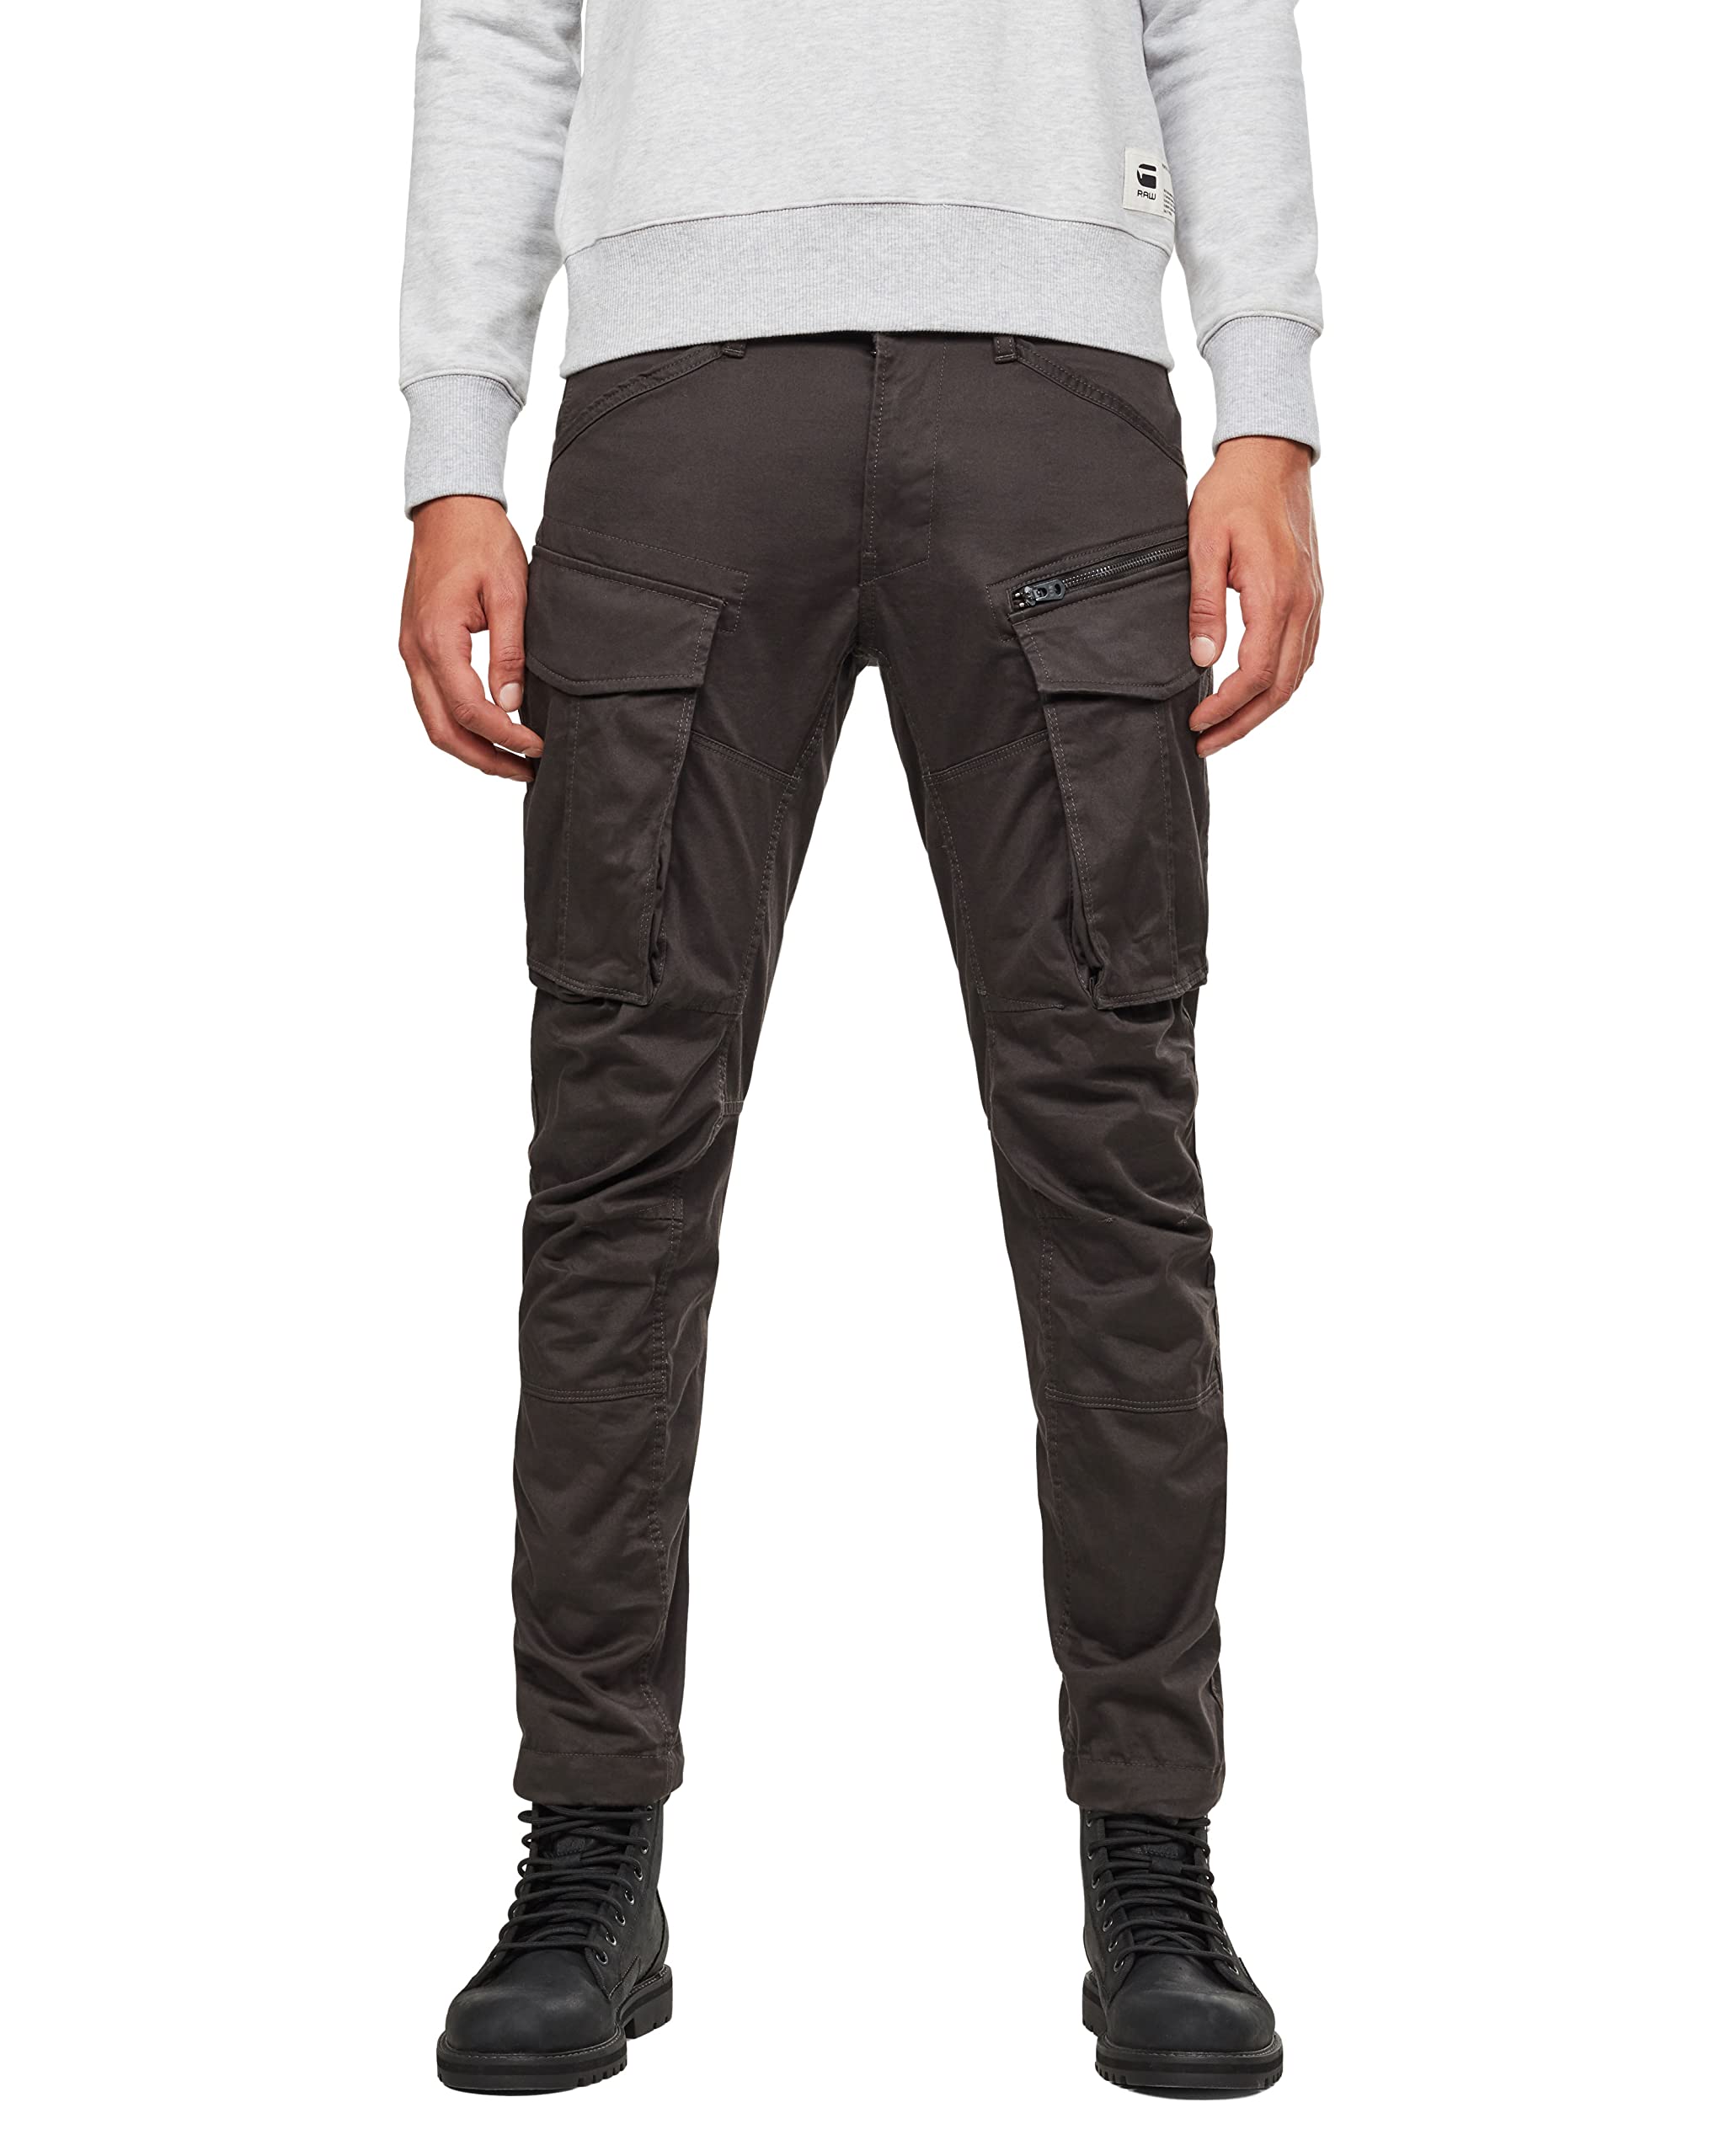 G-Star RAW Regular Cargo Pants 'Army Hose' in Dark Beige | ABOUT YOU